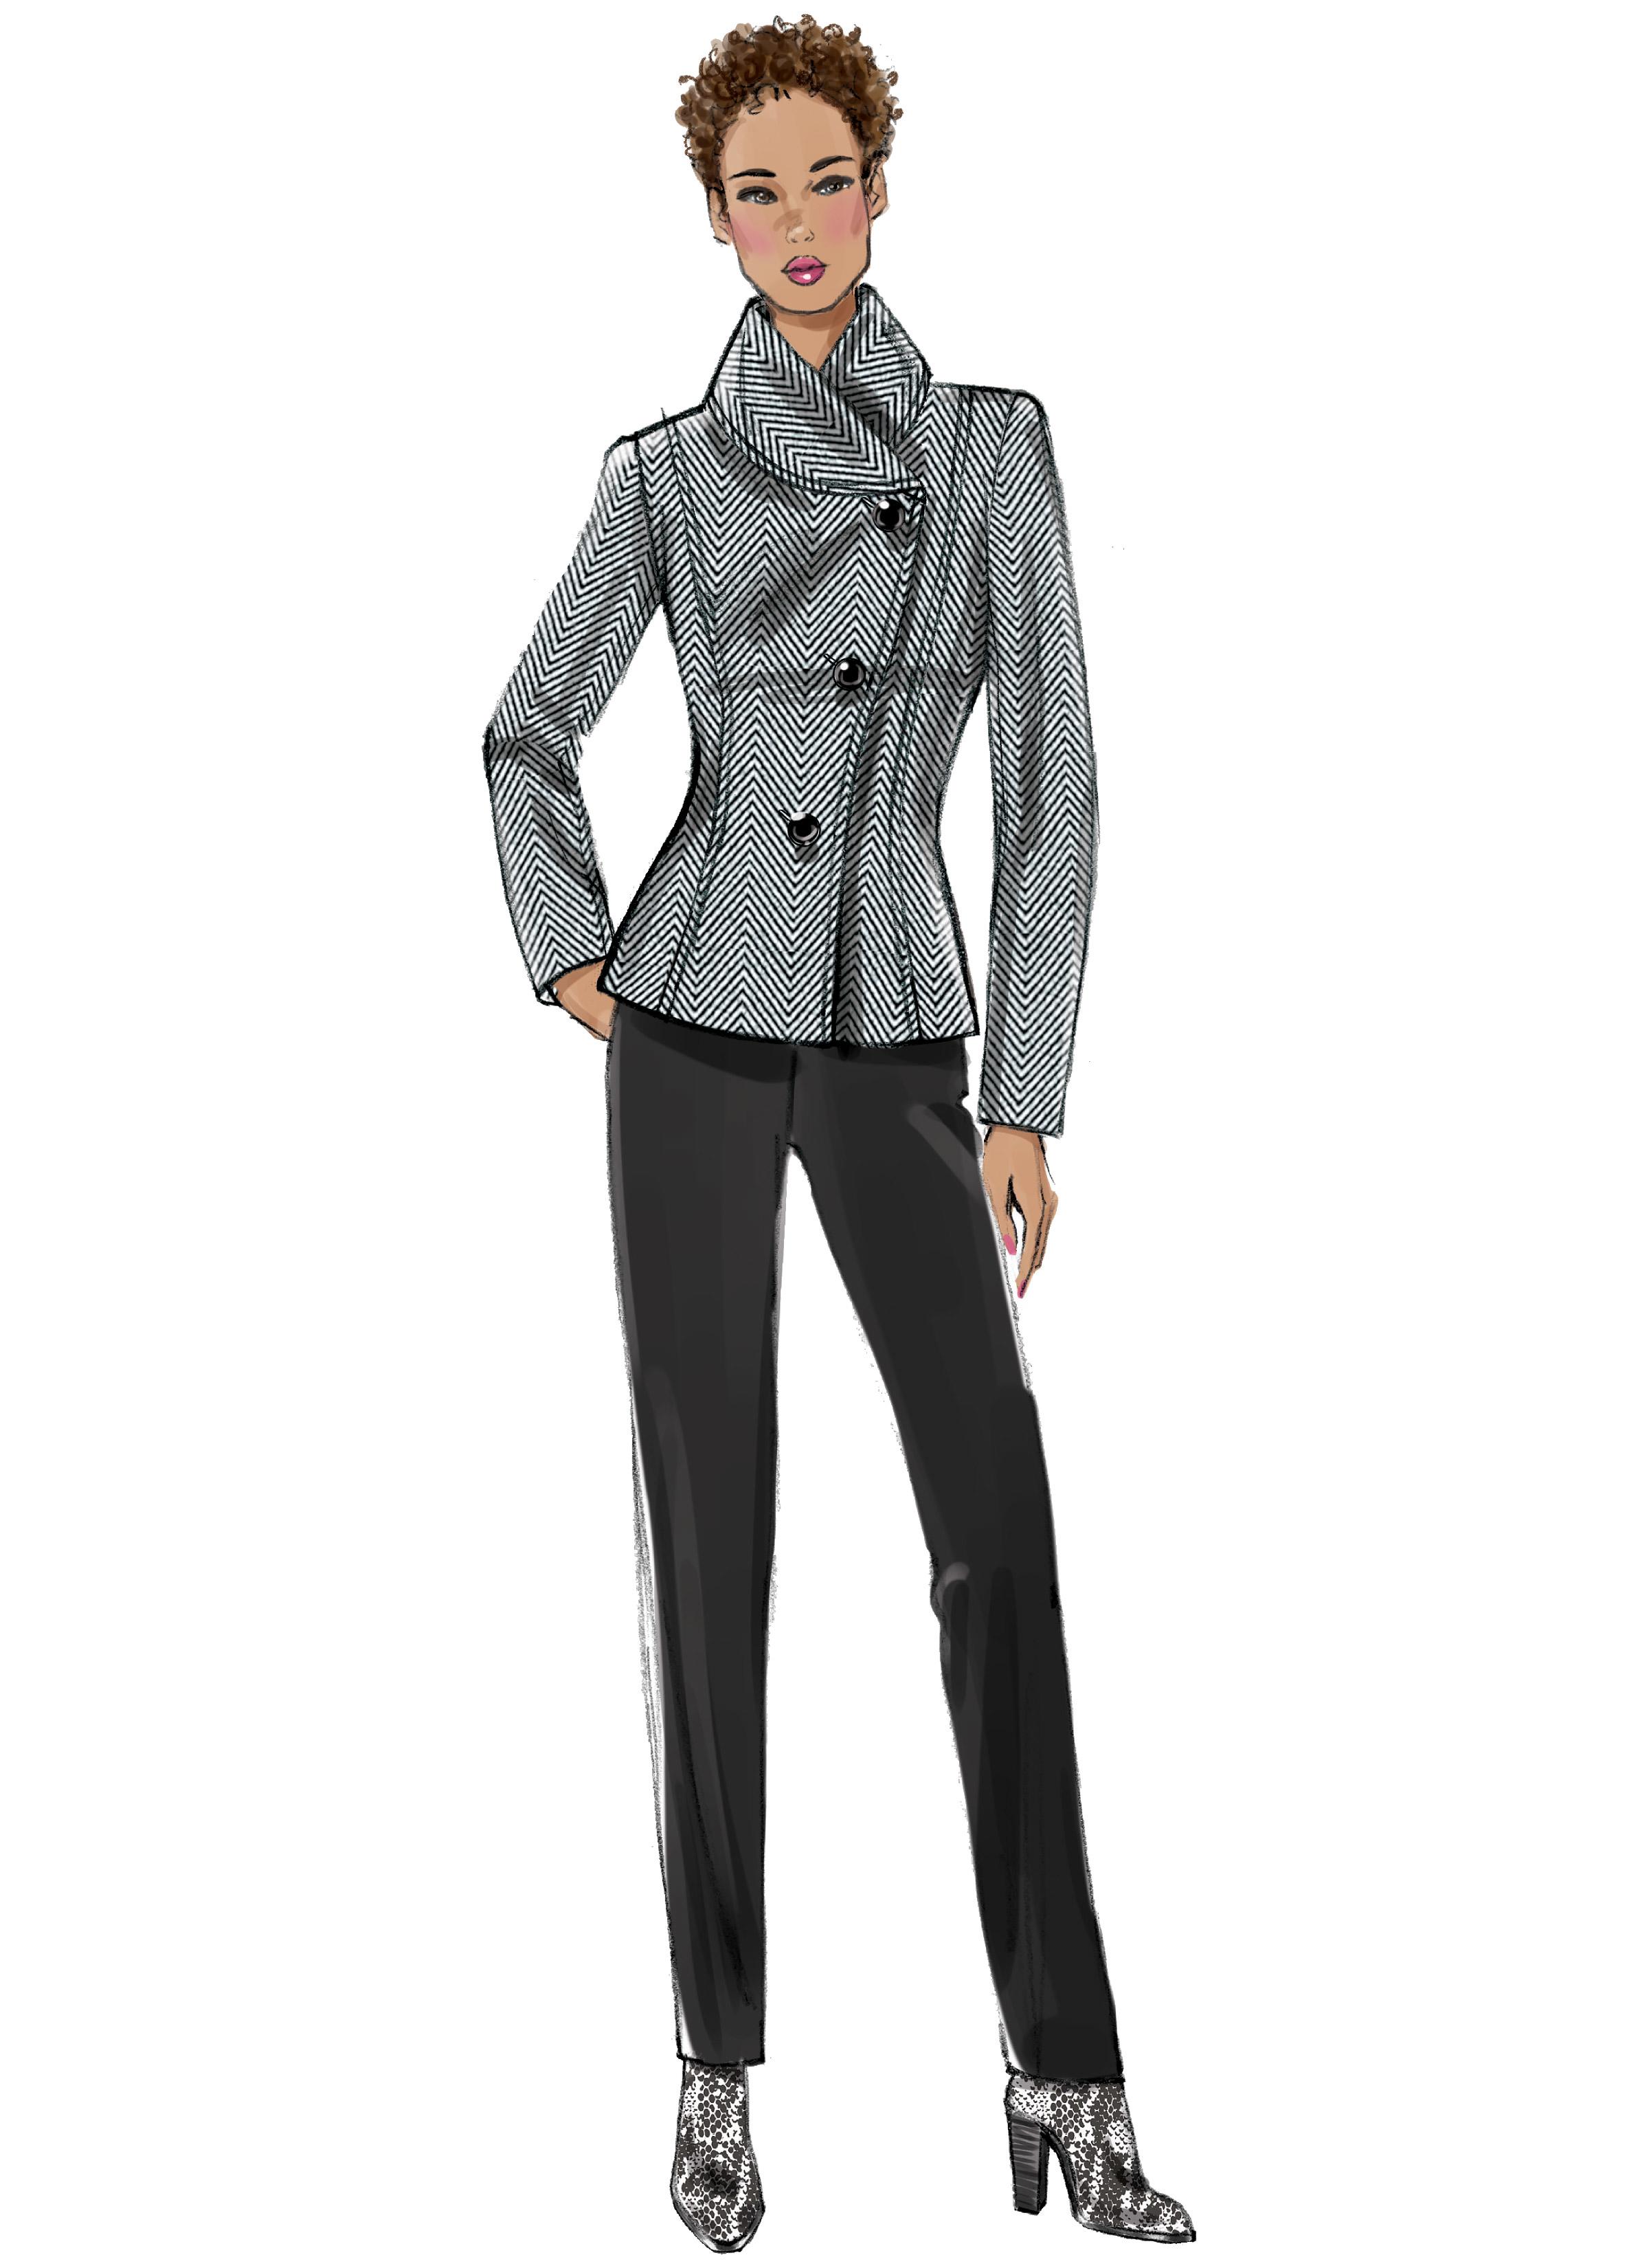 Butterick B6497 Misses'/Misses' Petite Jacket and Coats with Asymmetrical Front and Collar Variations